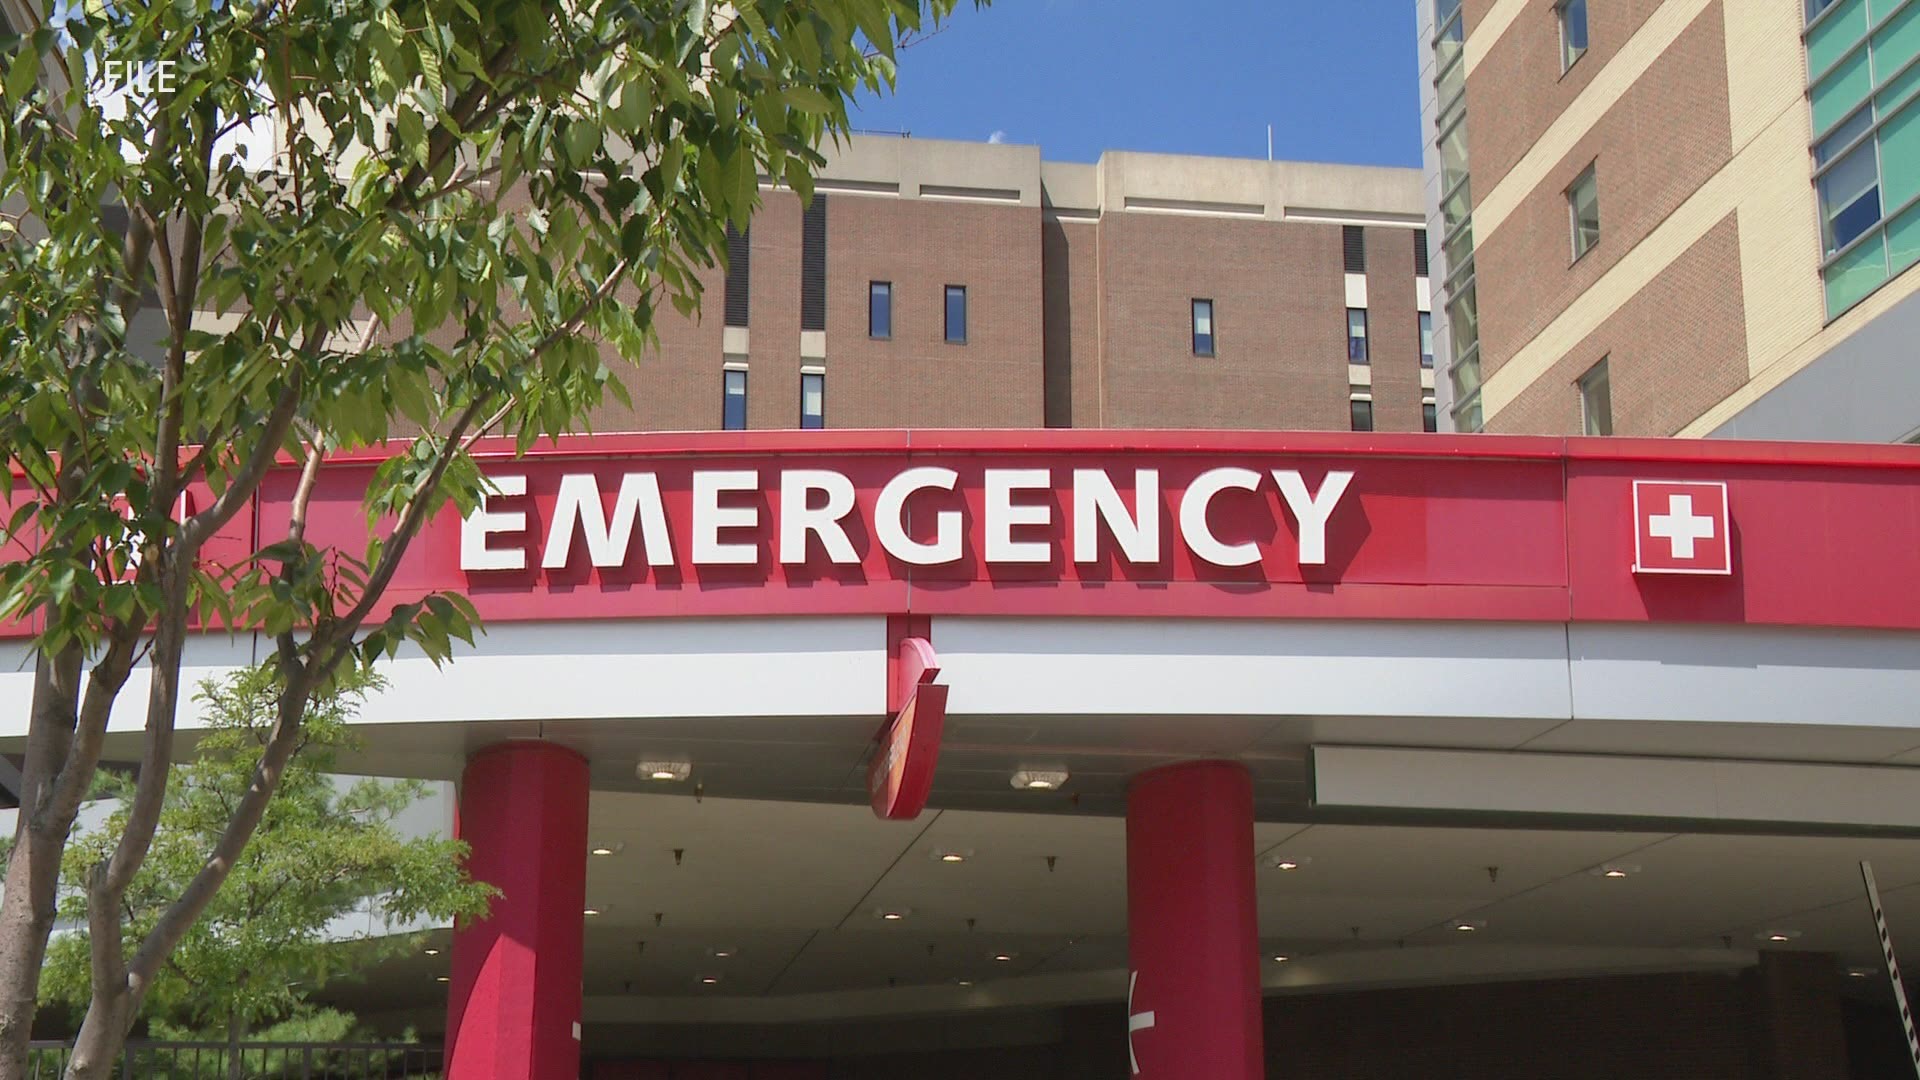 COVID-19 cases have been on a consistent rise and because of that, hospitals around West Michigan are nearing capacity.